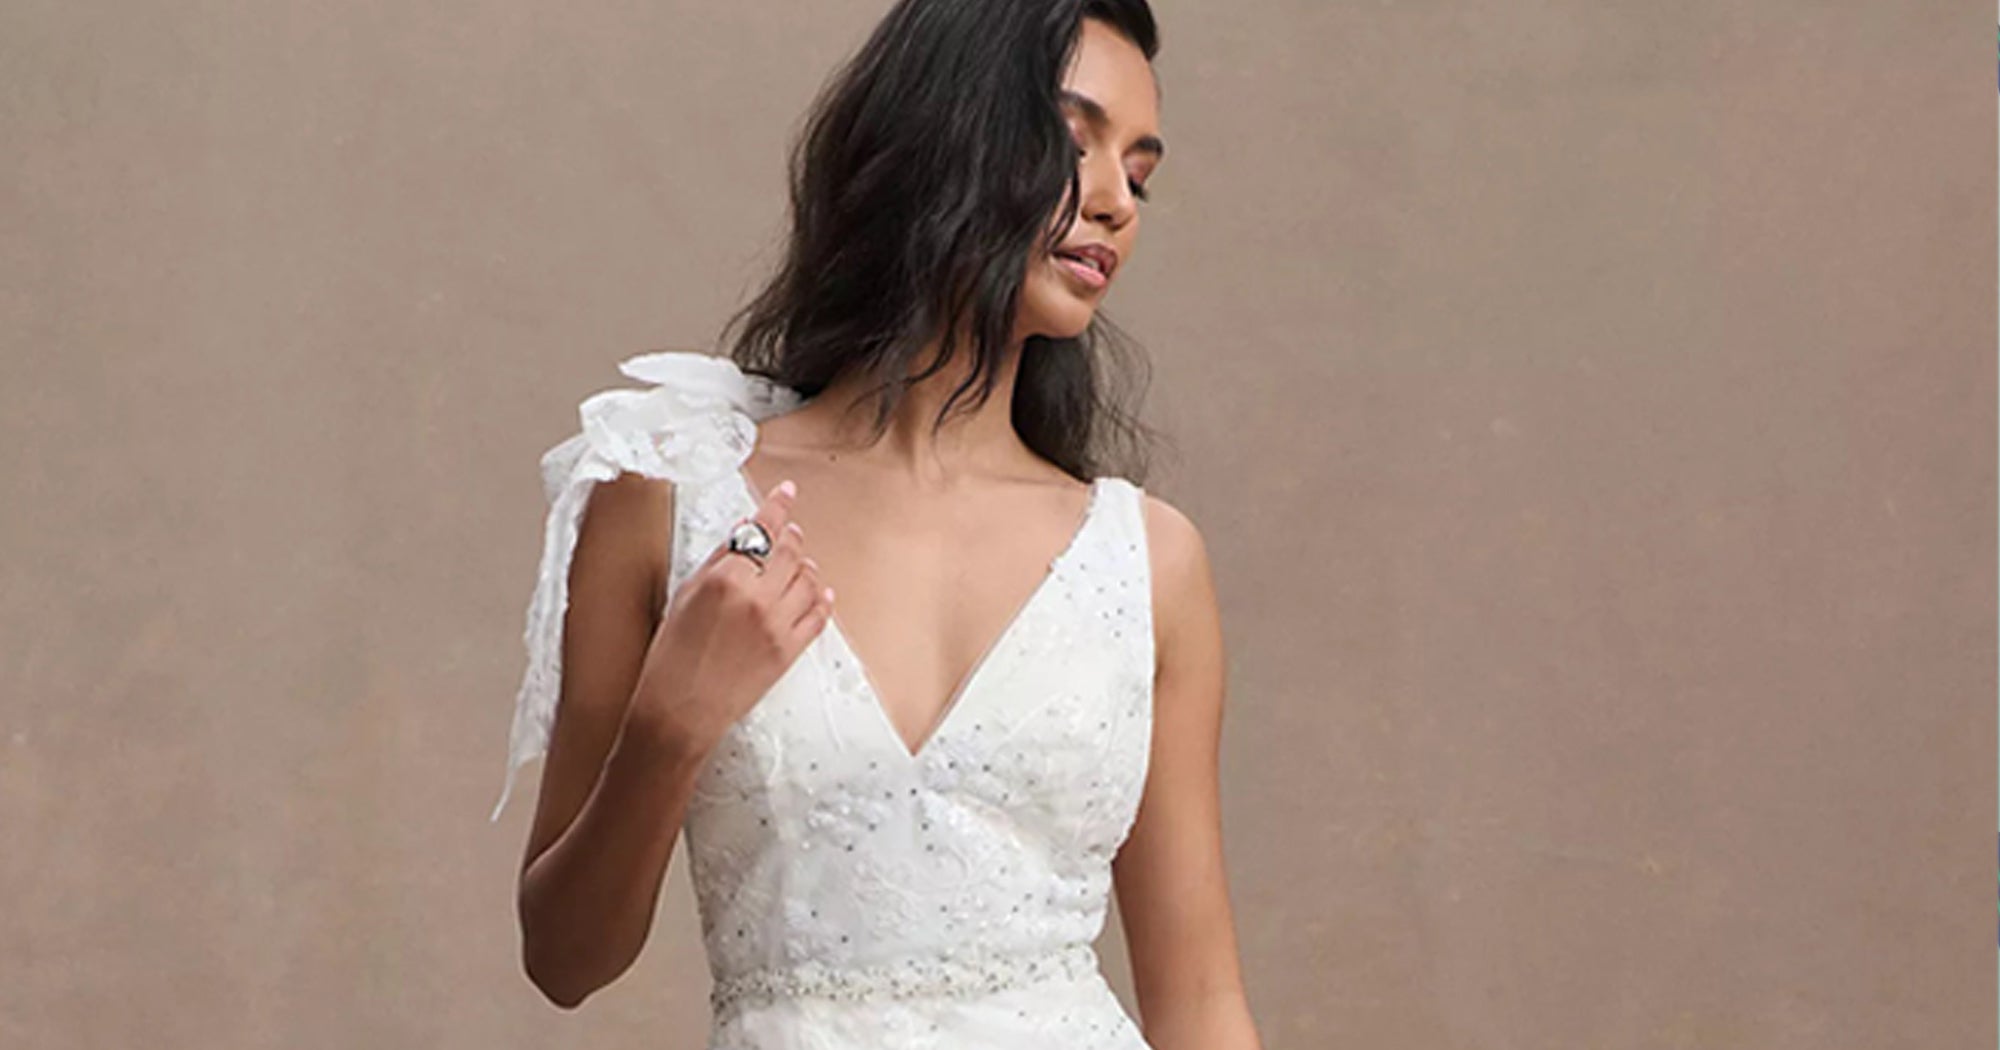 21 Wedding Reception Dresses For Every Type Of Bride